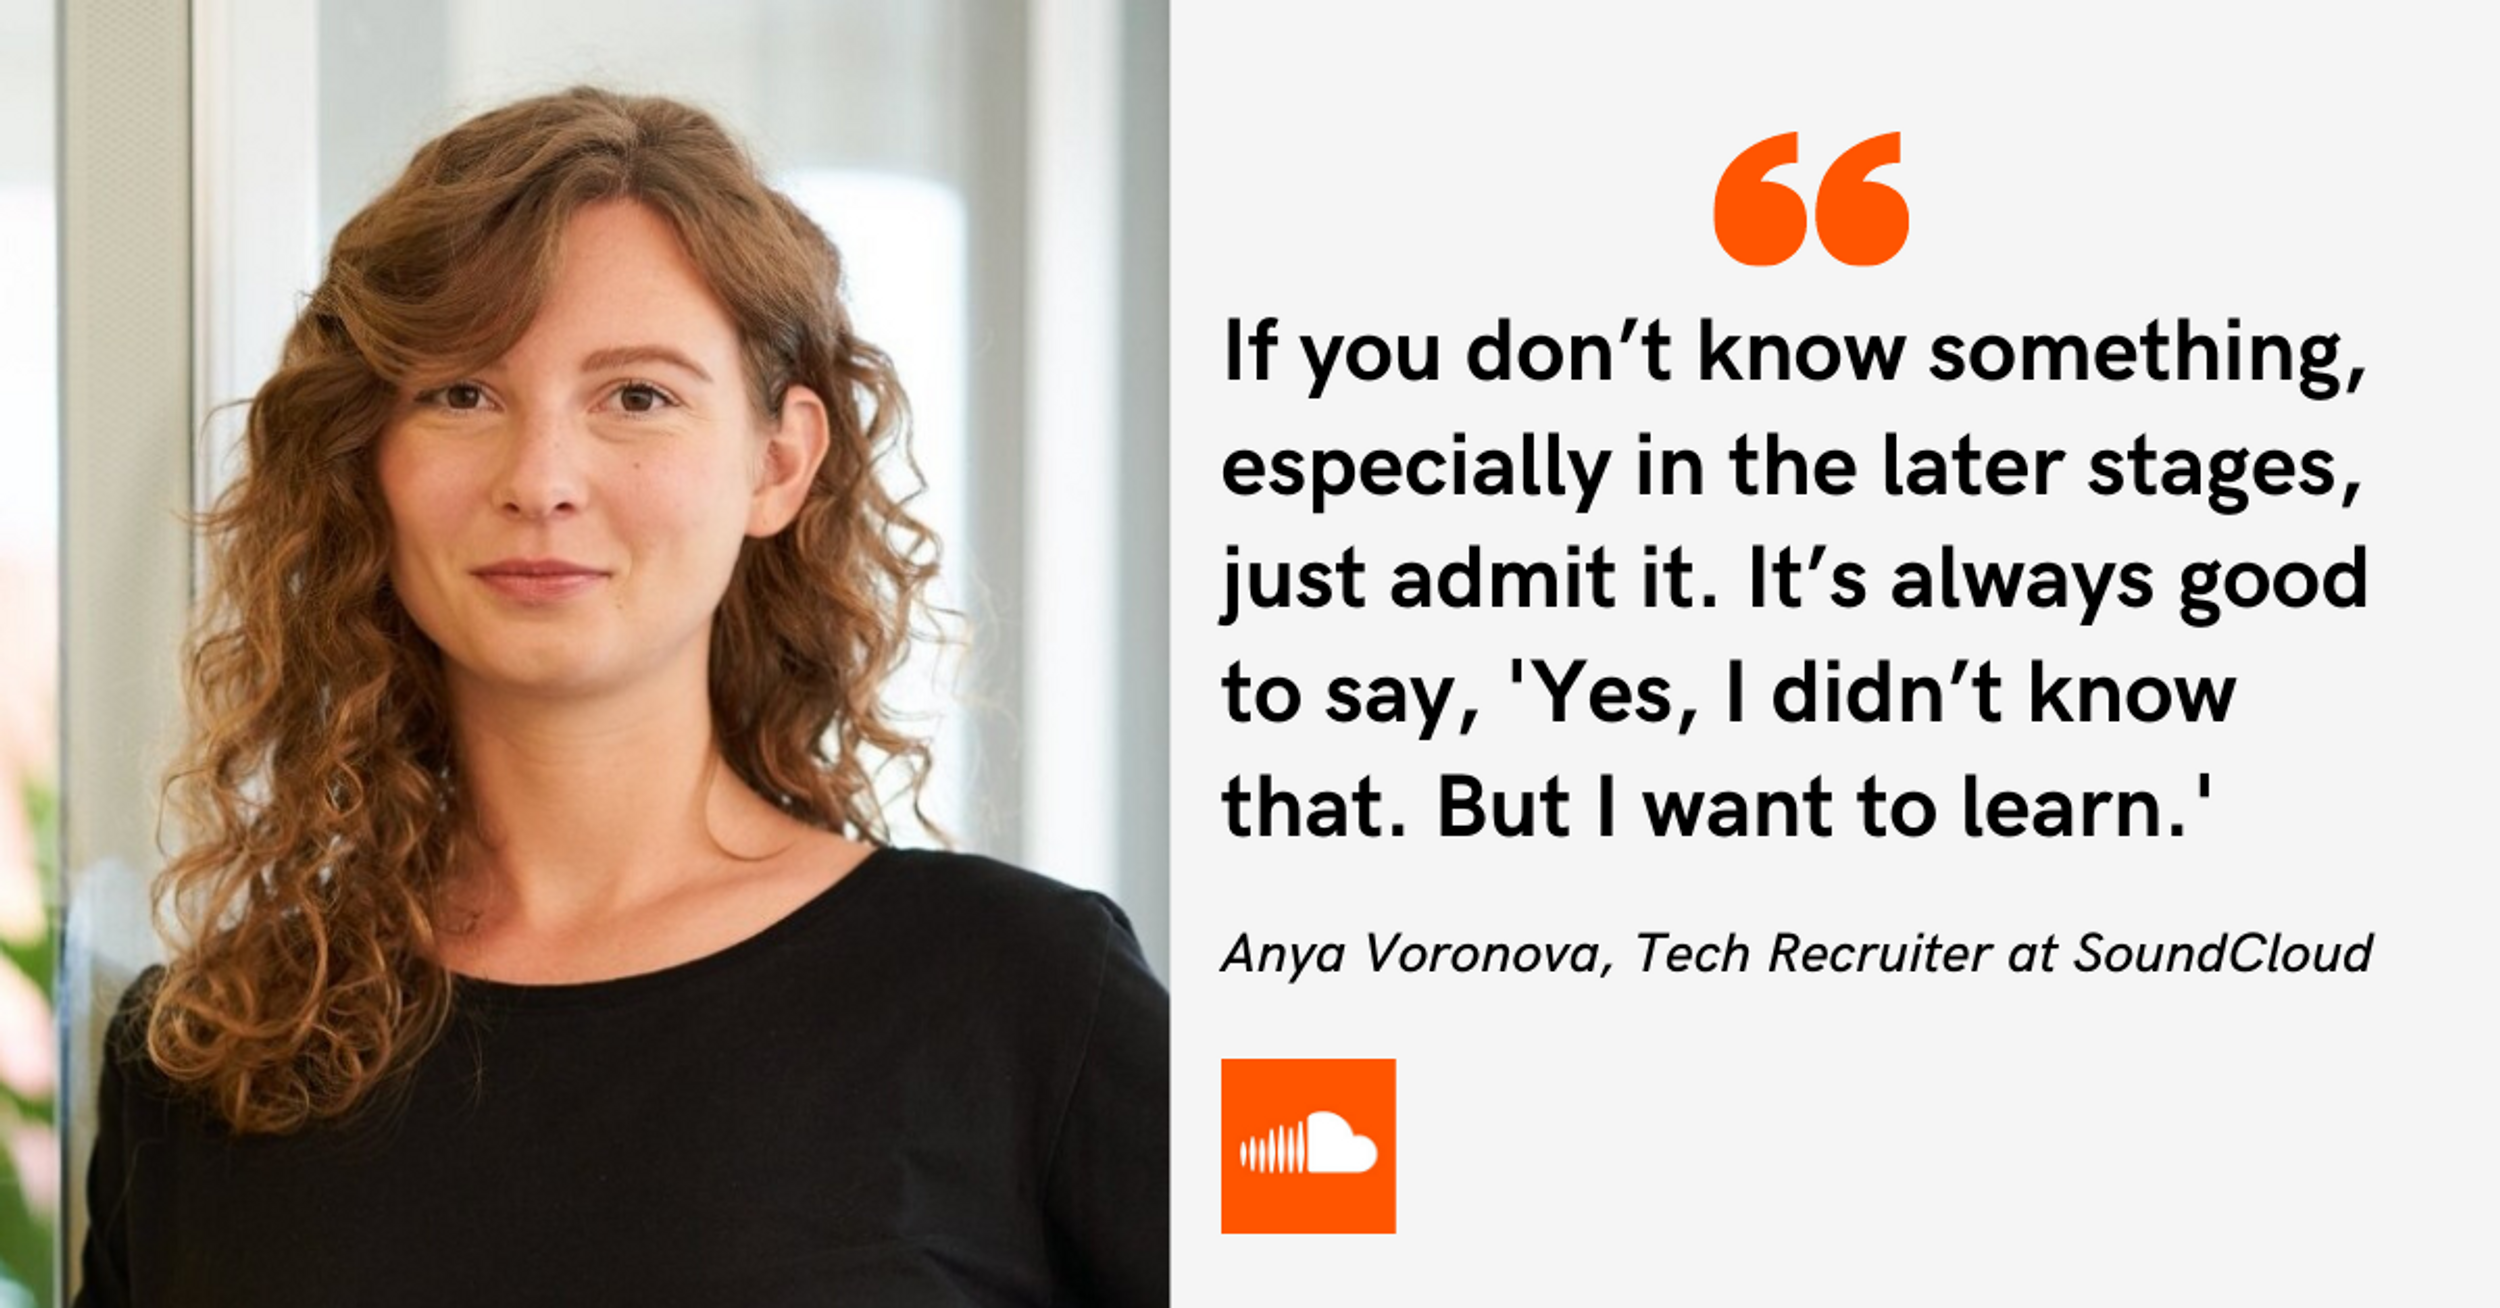 If you don’t know something, especially in the later stages, just admit it. It’s always good to say, 'Yes, I didn’t know that. But I want to learn.' -Anya Voronova, Tech Recruiter at SoundCloud